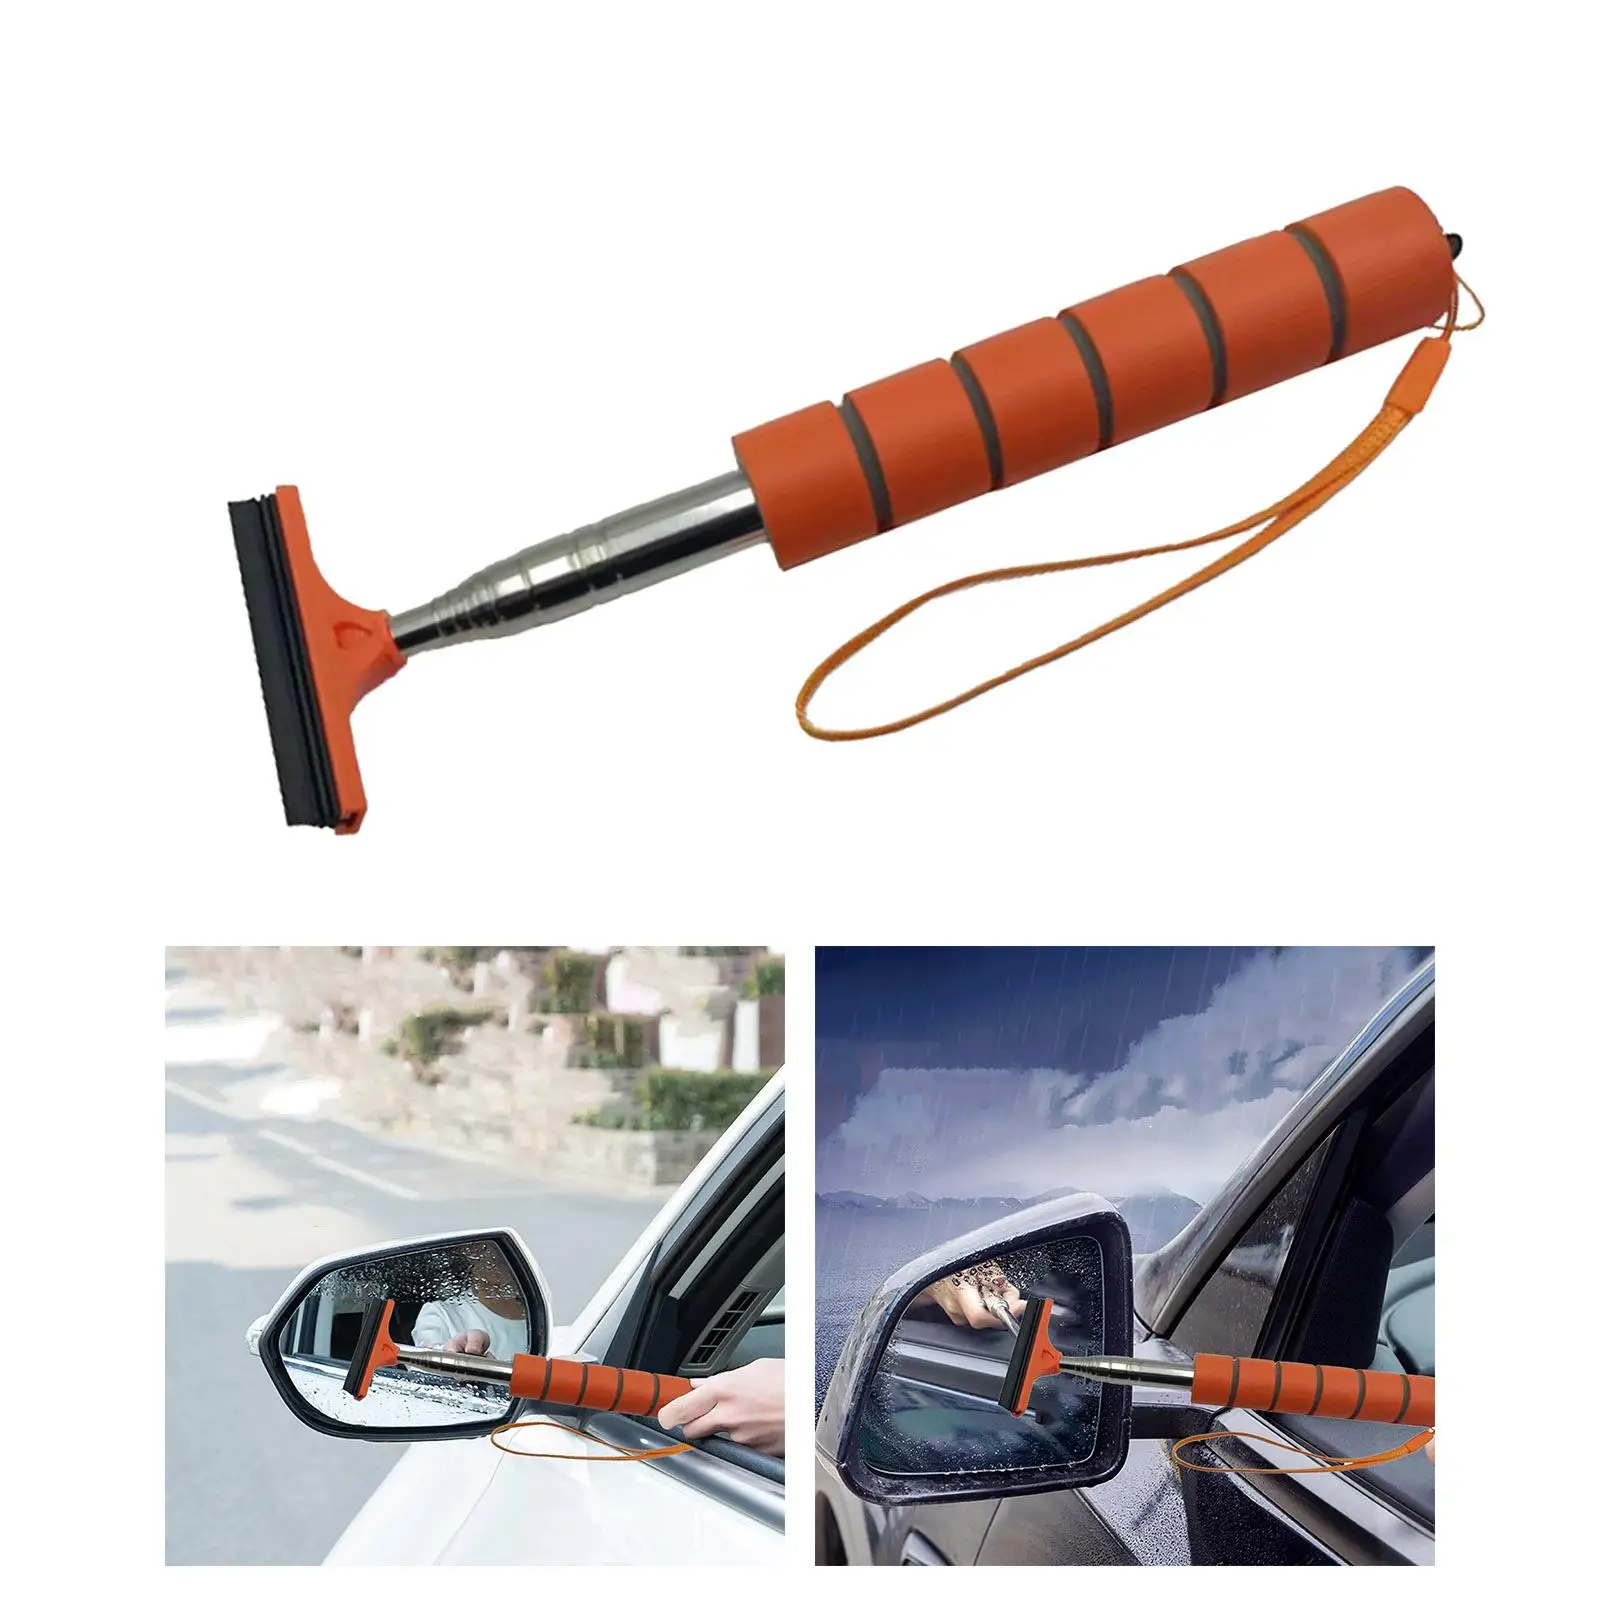 Car Rearview Mirror Wiper Portable for Rainy Foggy Weather Snow Brush Shovel